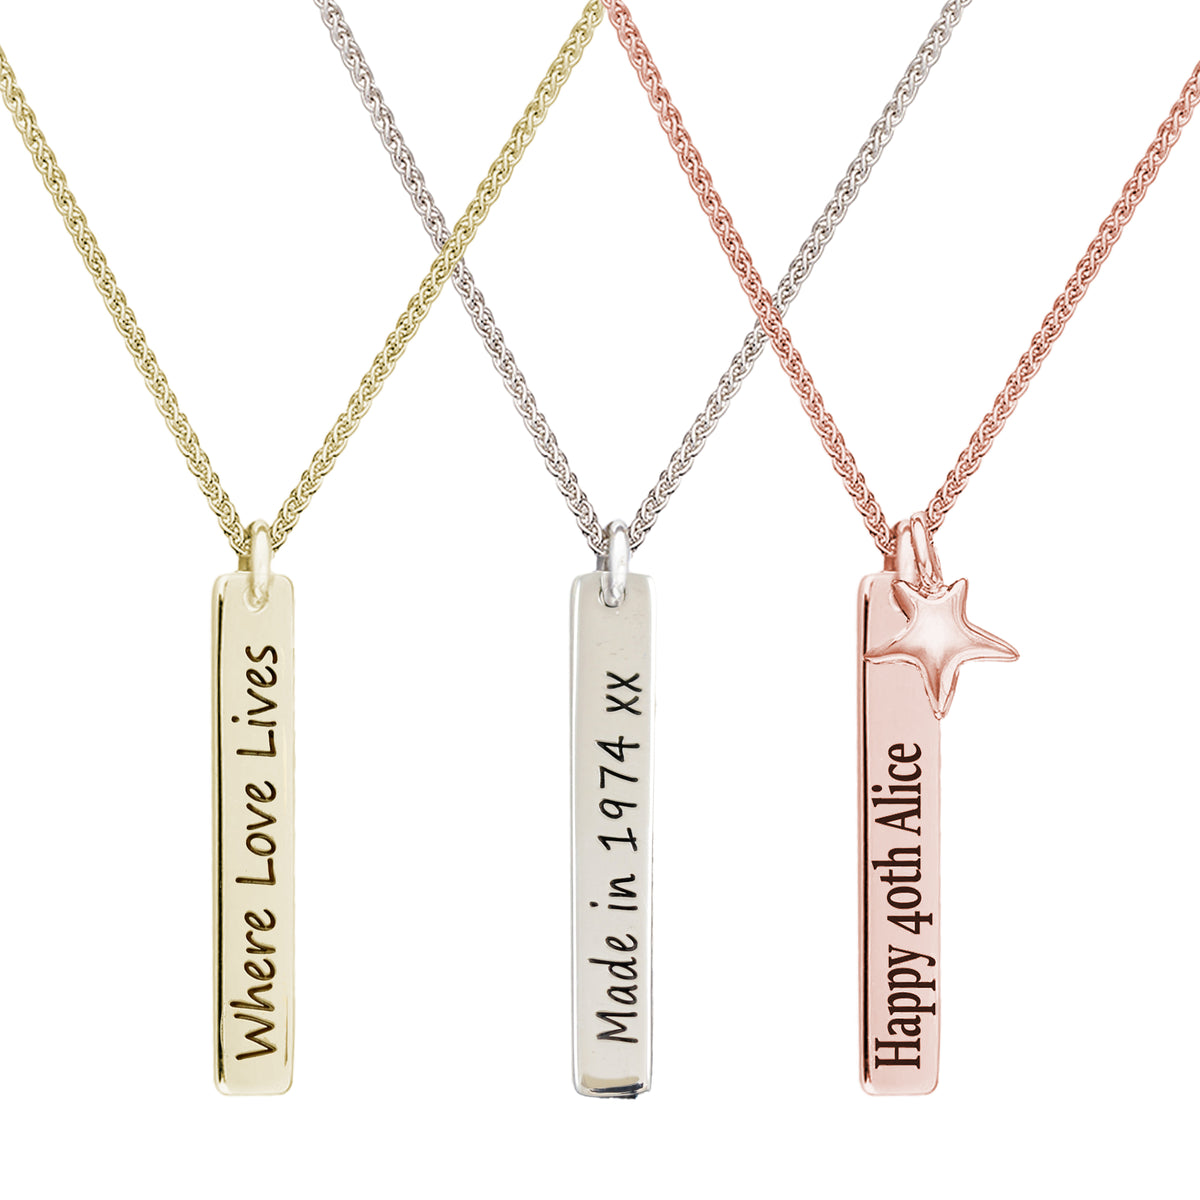 silver gold and rose gold message tag necklaces personalized with 40th 50th birthday messages